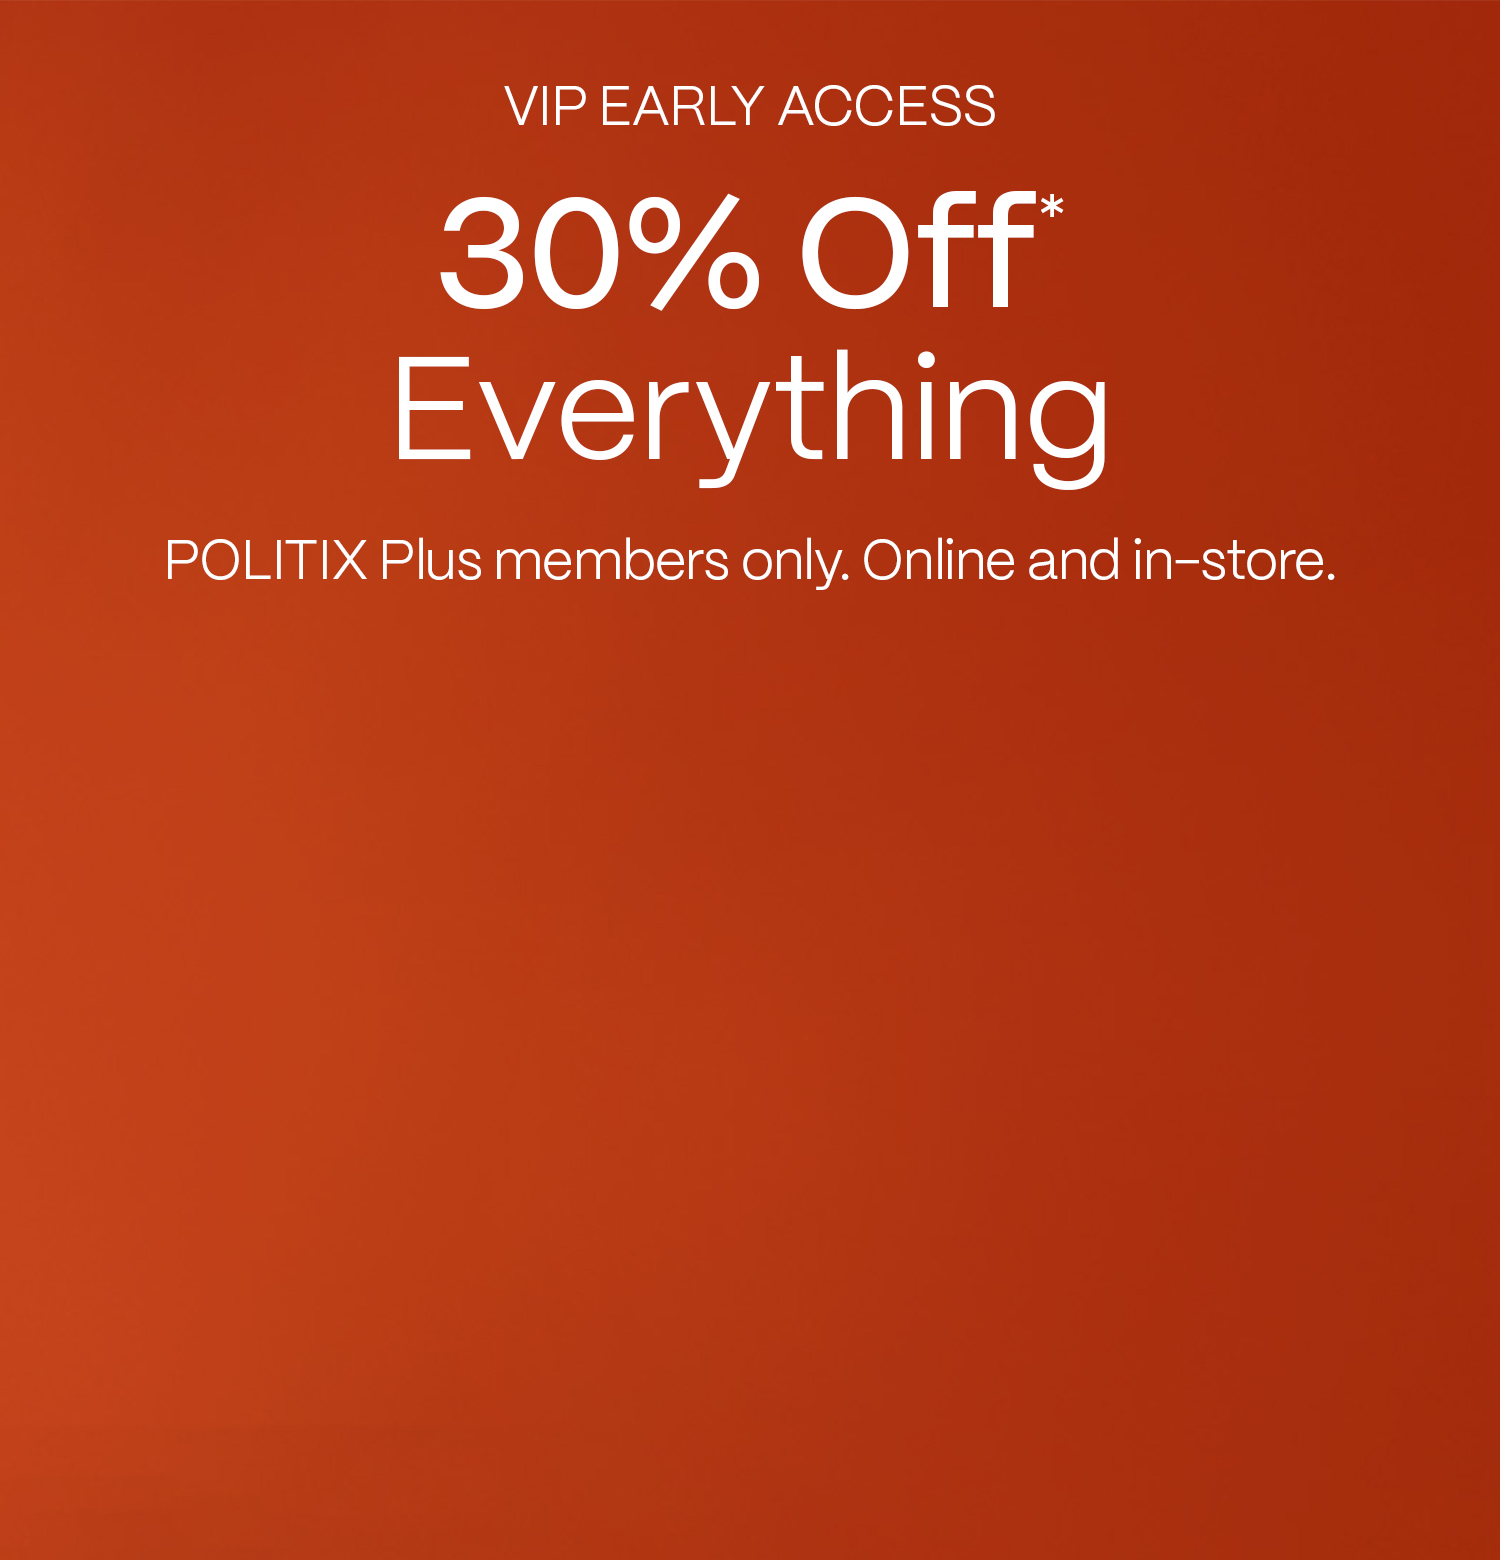 VIP Early Access to Cyber Sale | 30% Off Everything | Politix Plus Members - Mobile